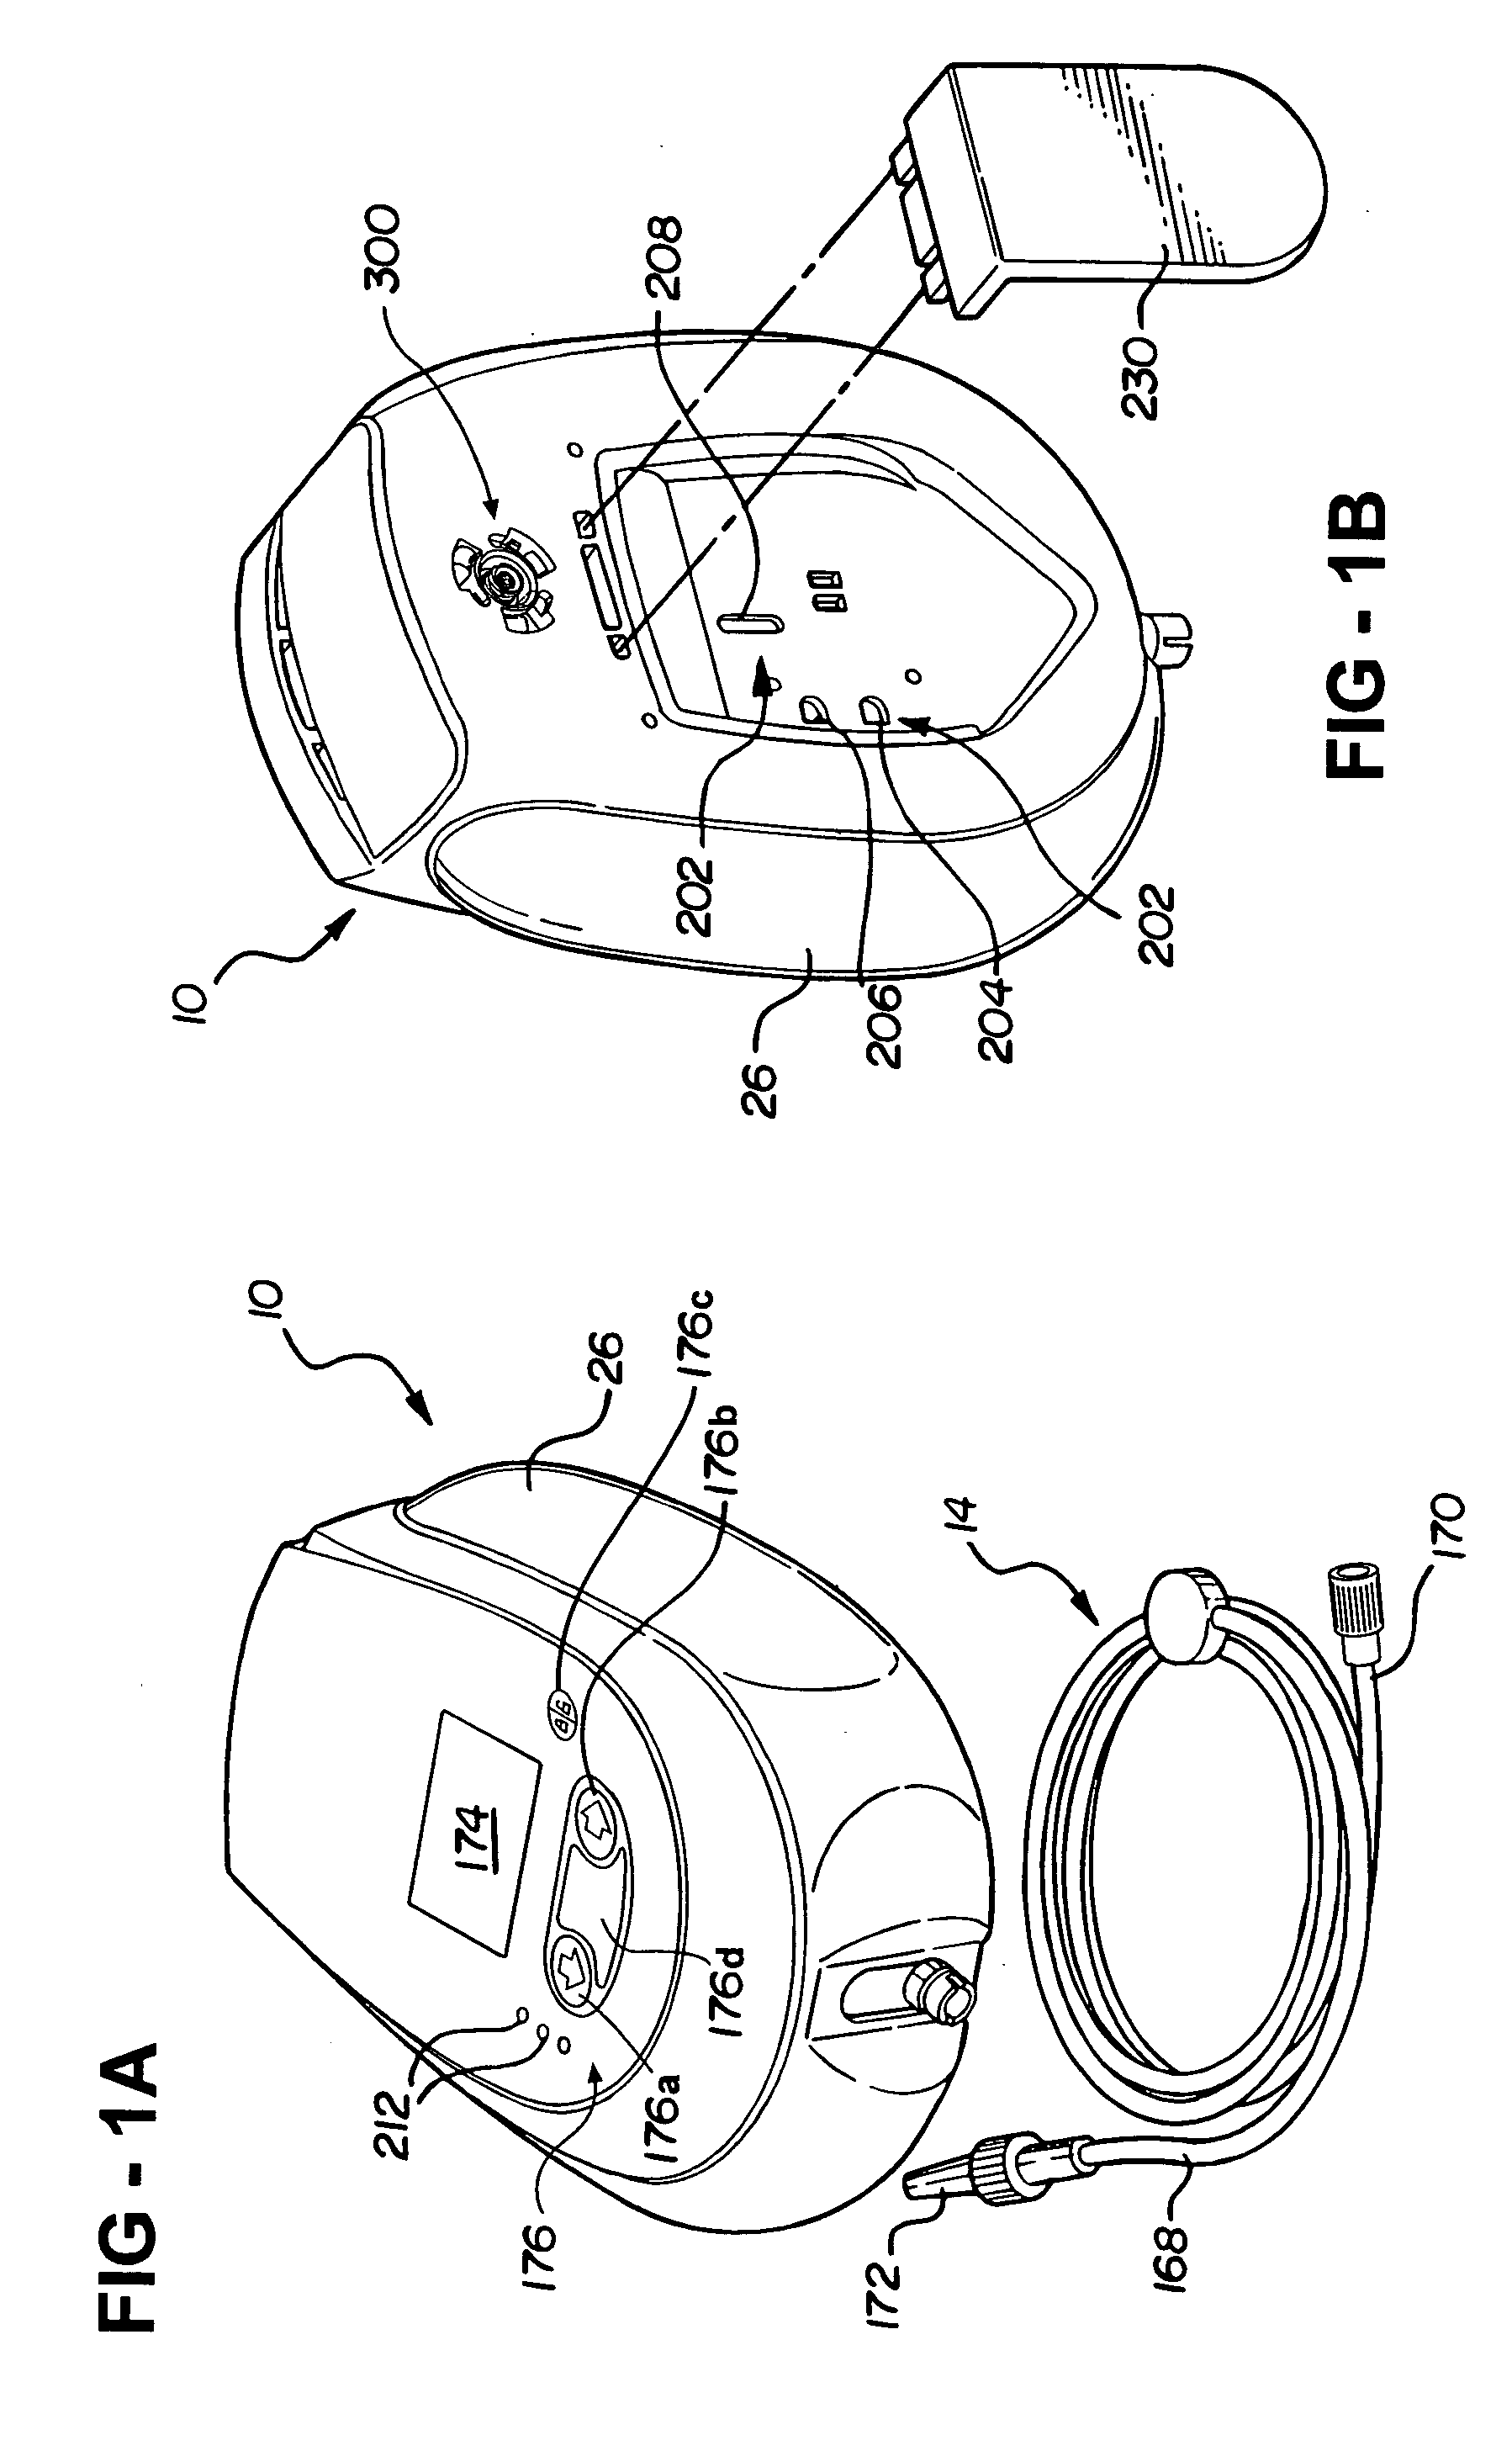 Reprogrammable fluid delivery system and method of use